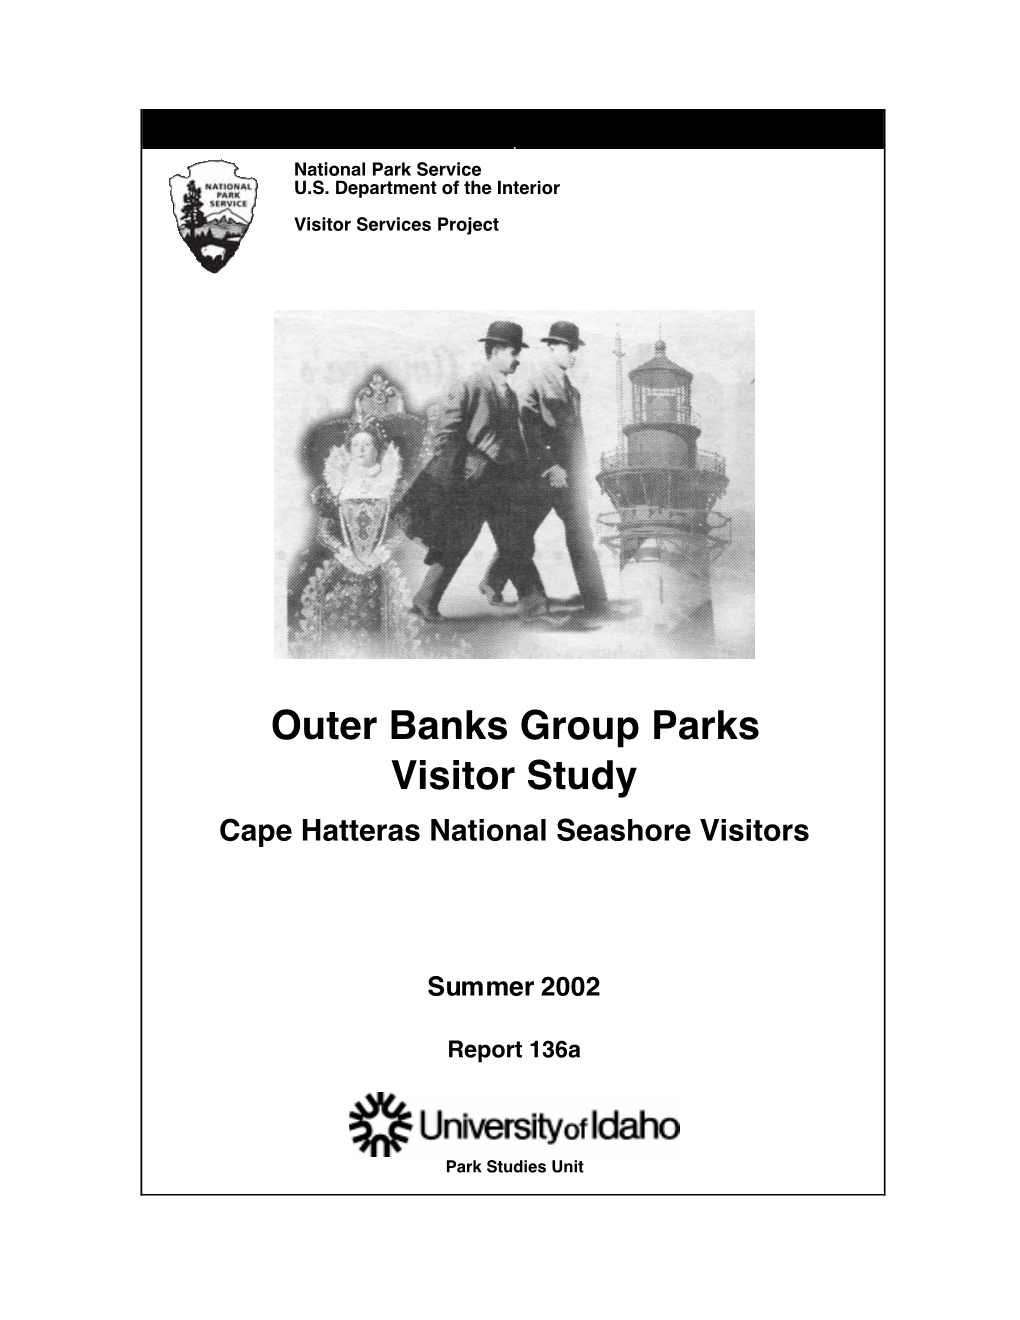 Outer Banks Group Parks Visitor Study Cape Hatteras National Seashore Visitors